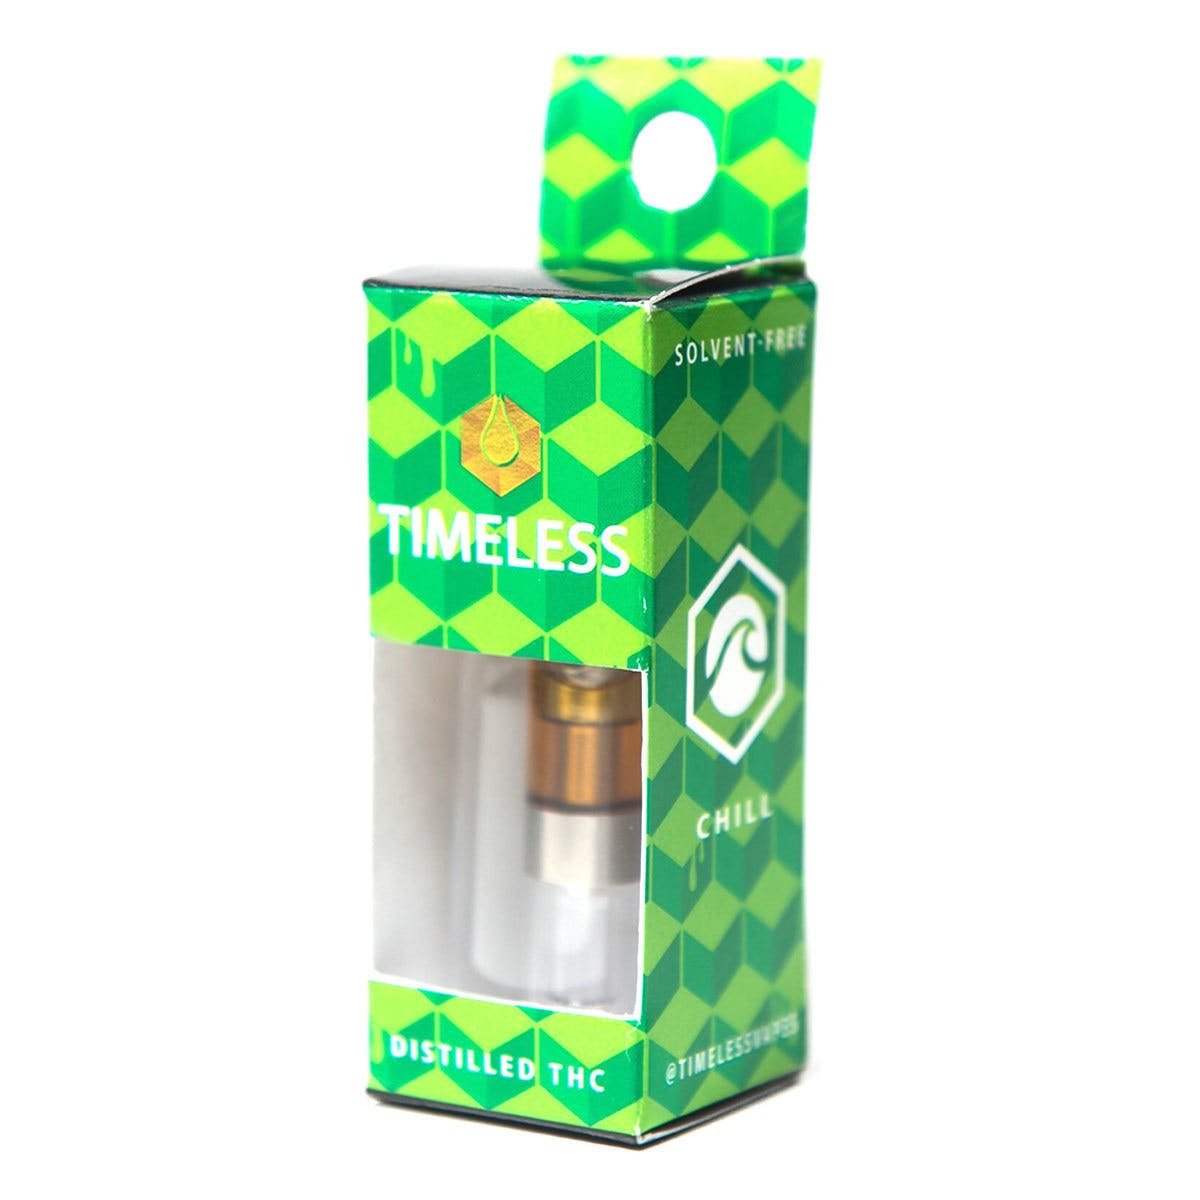 concentrate-timeless-vapes-1000mg-gg4-vape-cartridge-chill